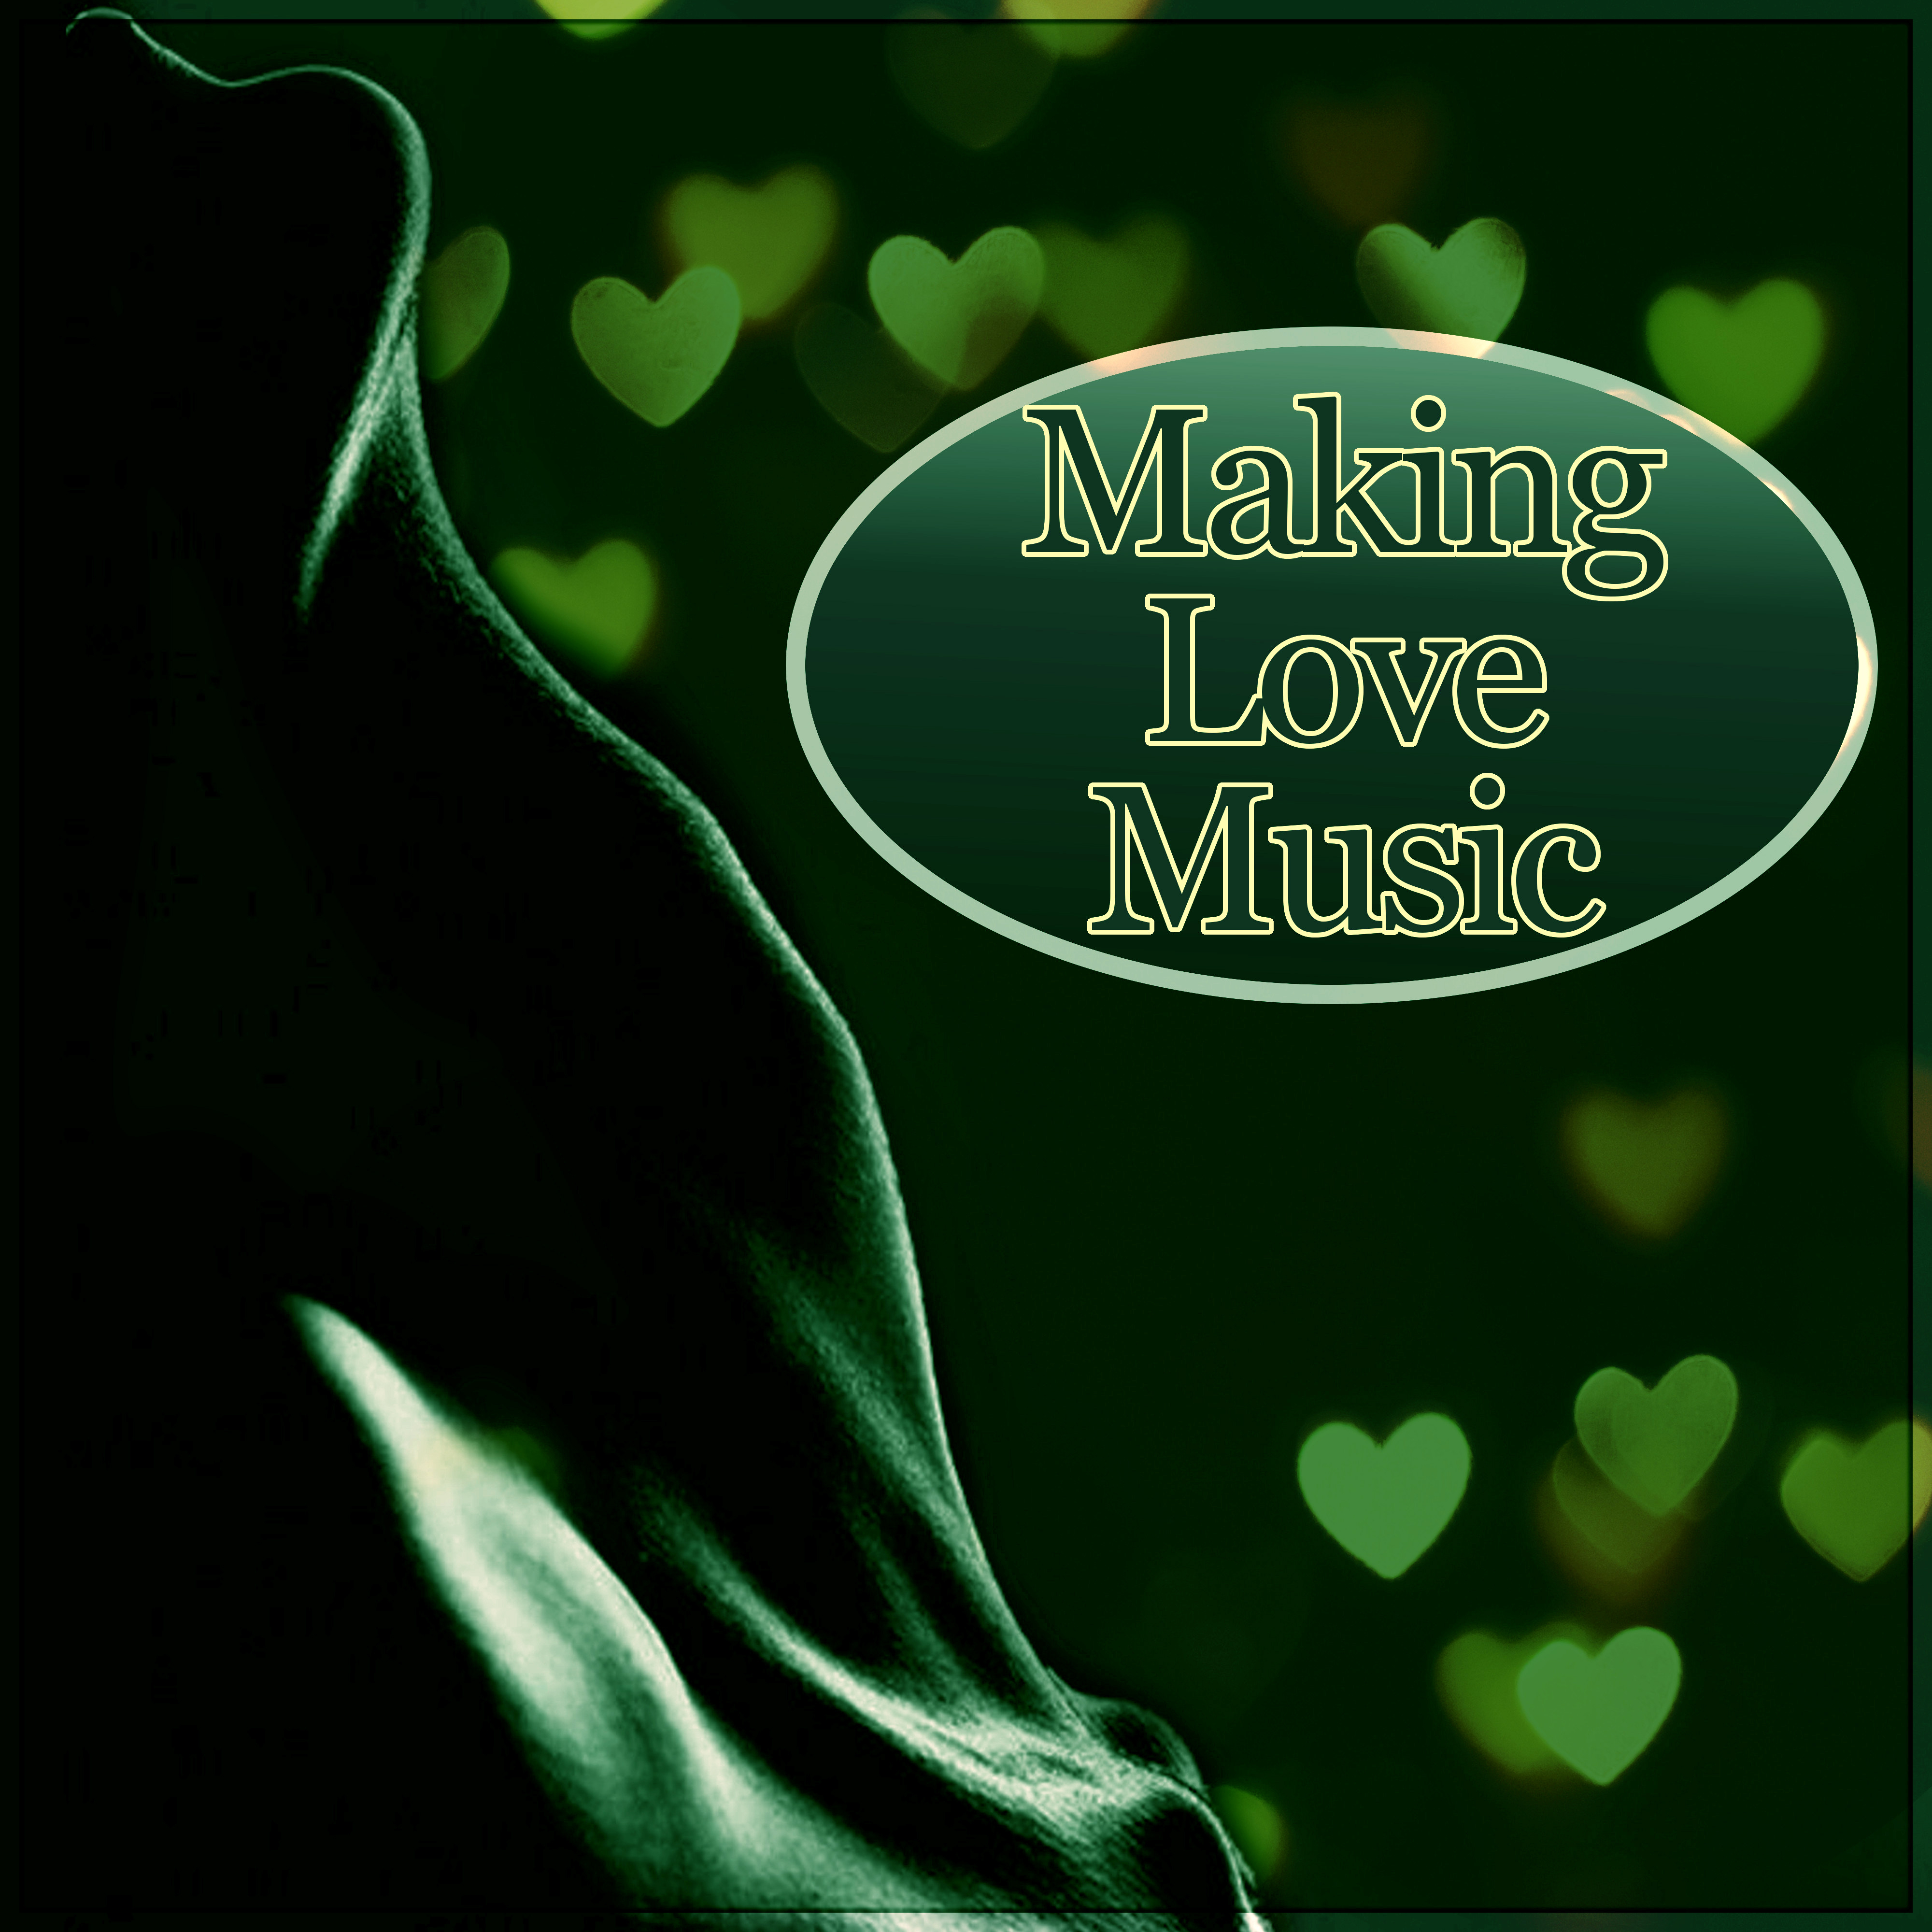 Making Love Music - Hot Oil Massage, Hot Passionate *** Music, **** Songs for Lovers, Tantra ***, Tantric Love Making